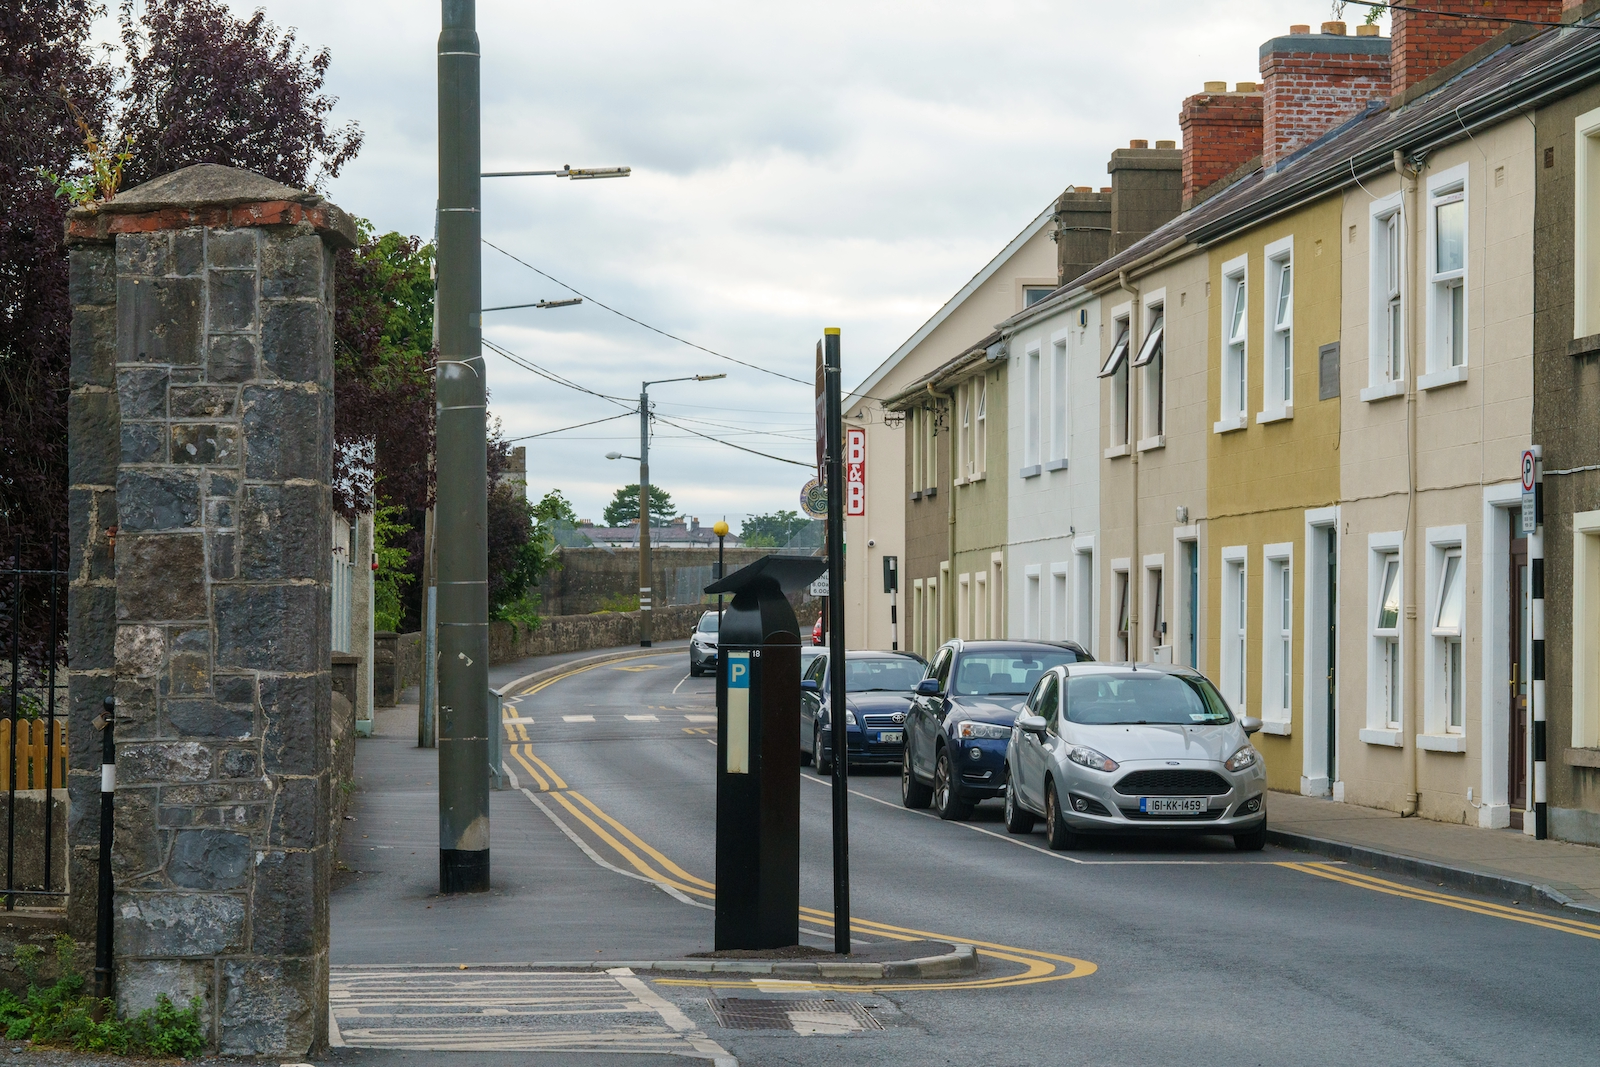 michael-street-in-the-city-of-kilkenny-[august-2018]-227088-excellent